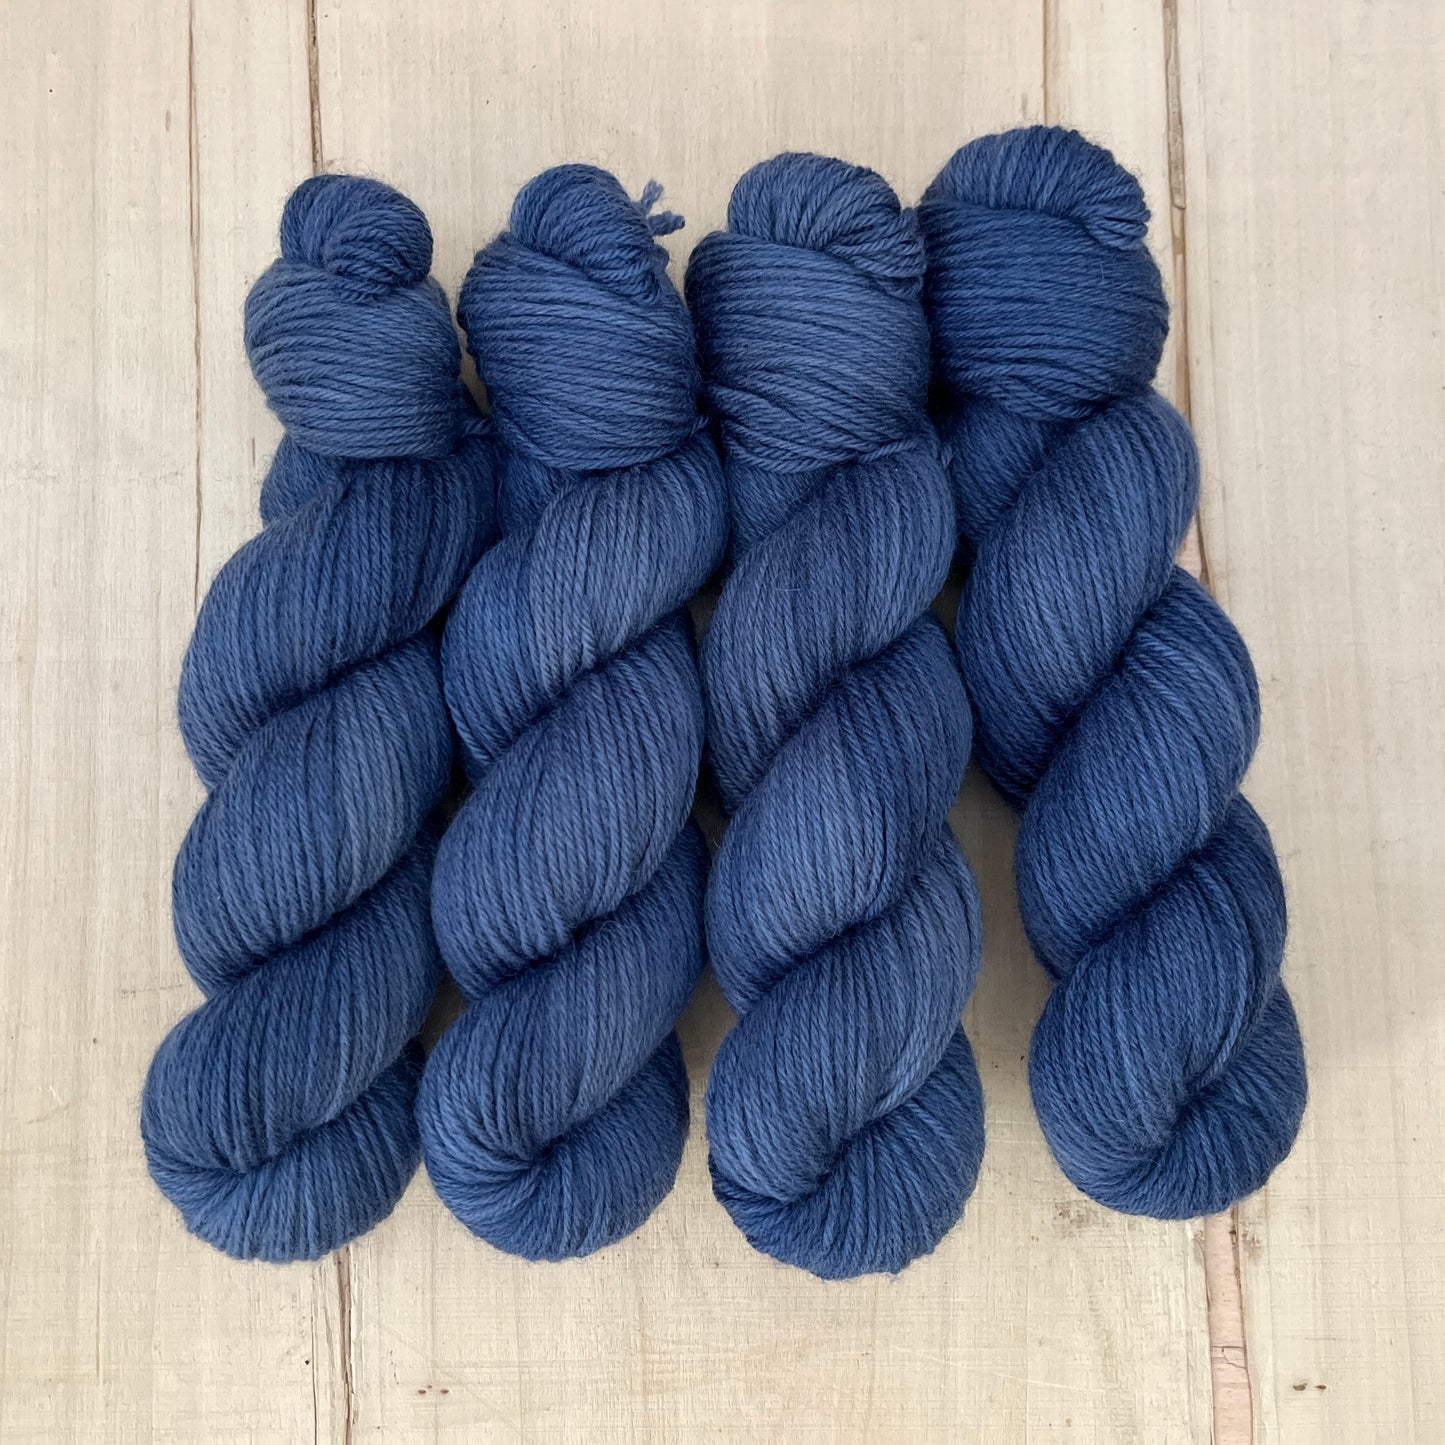 DYED TO ORDER - currel | DK